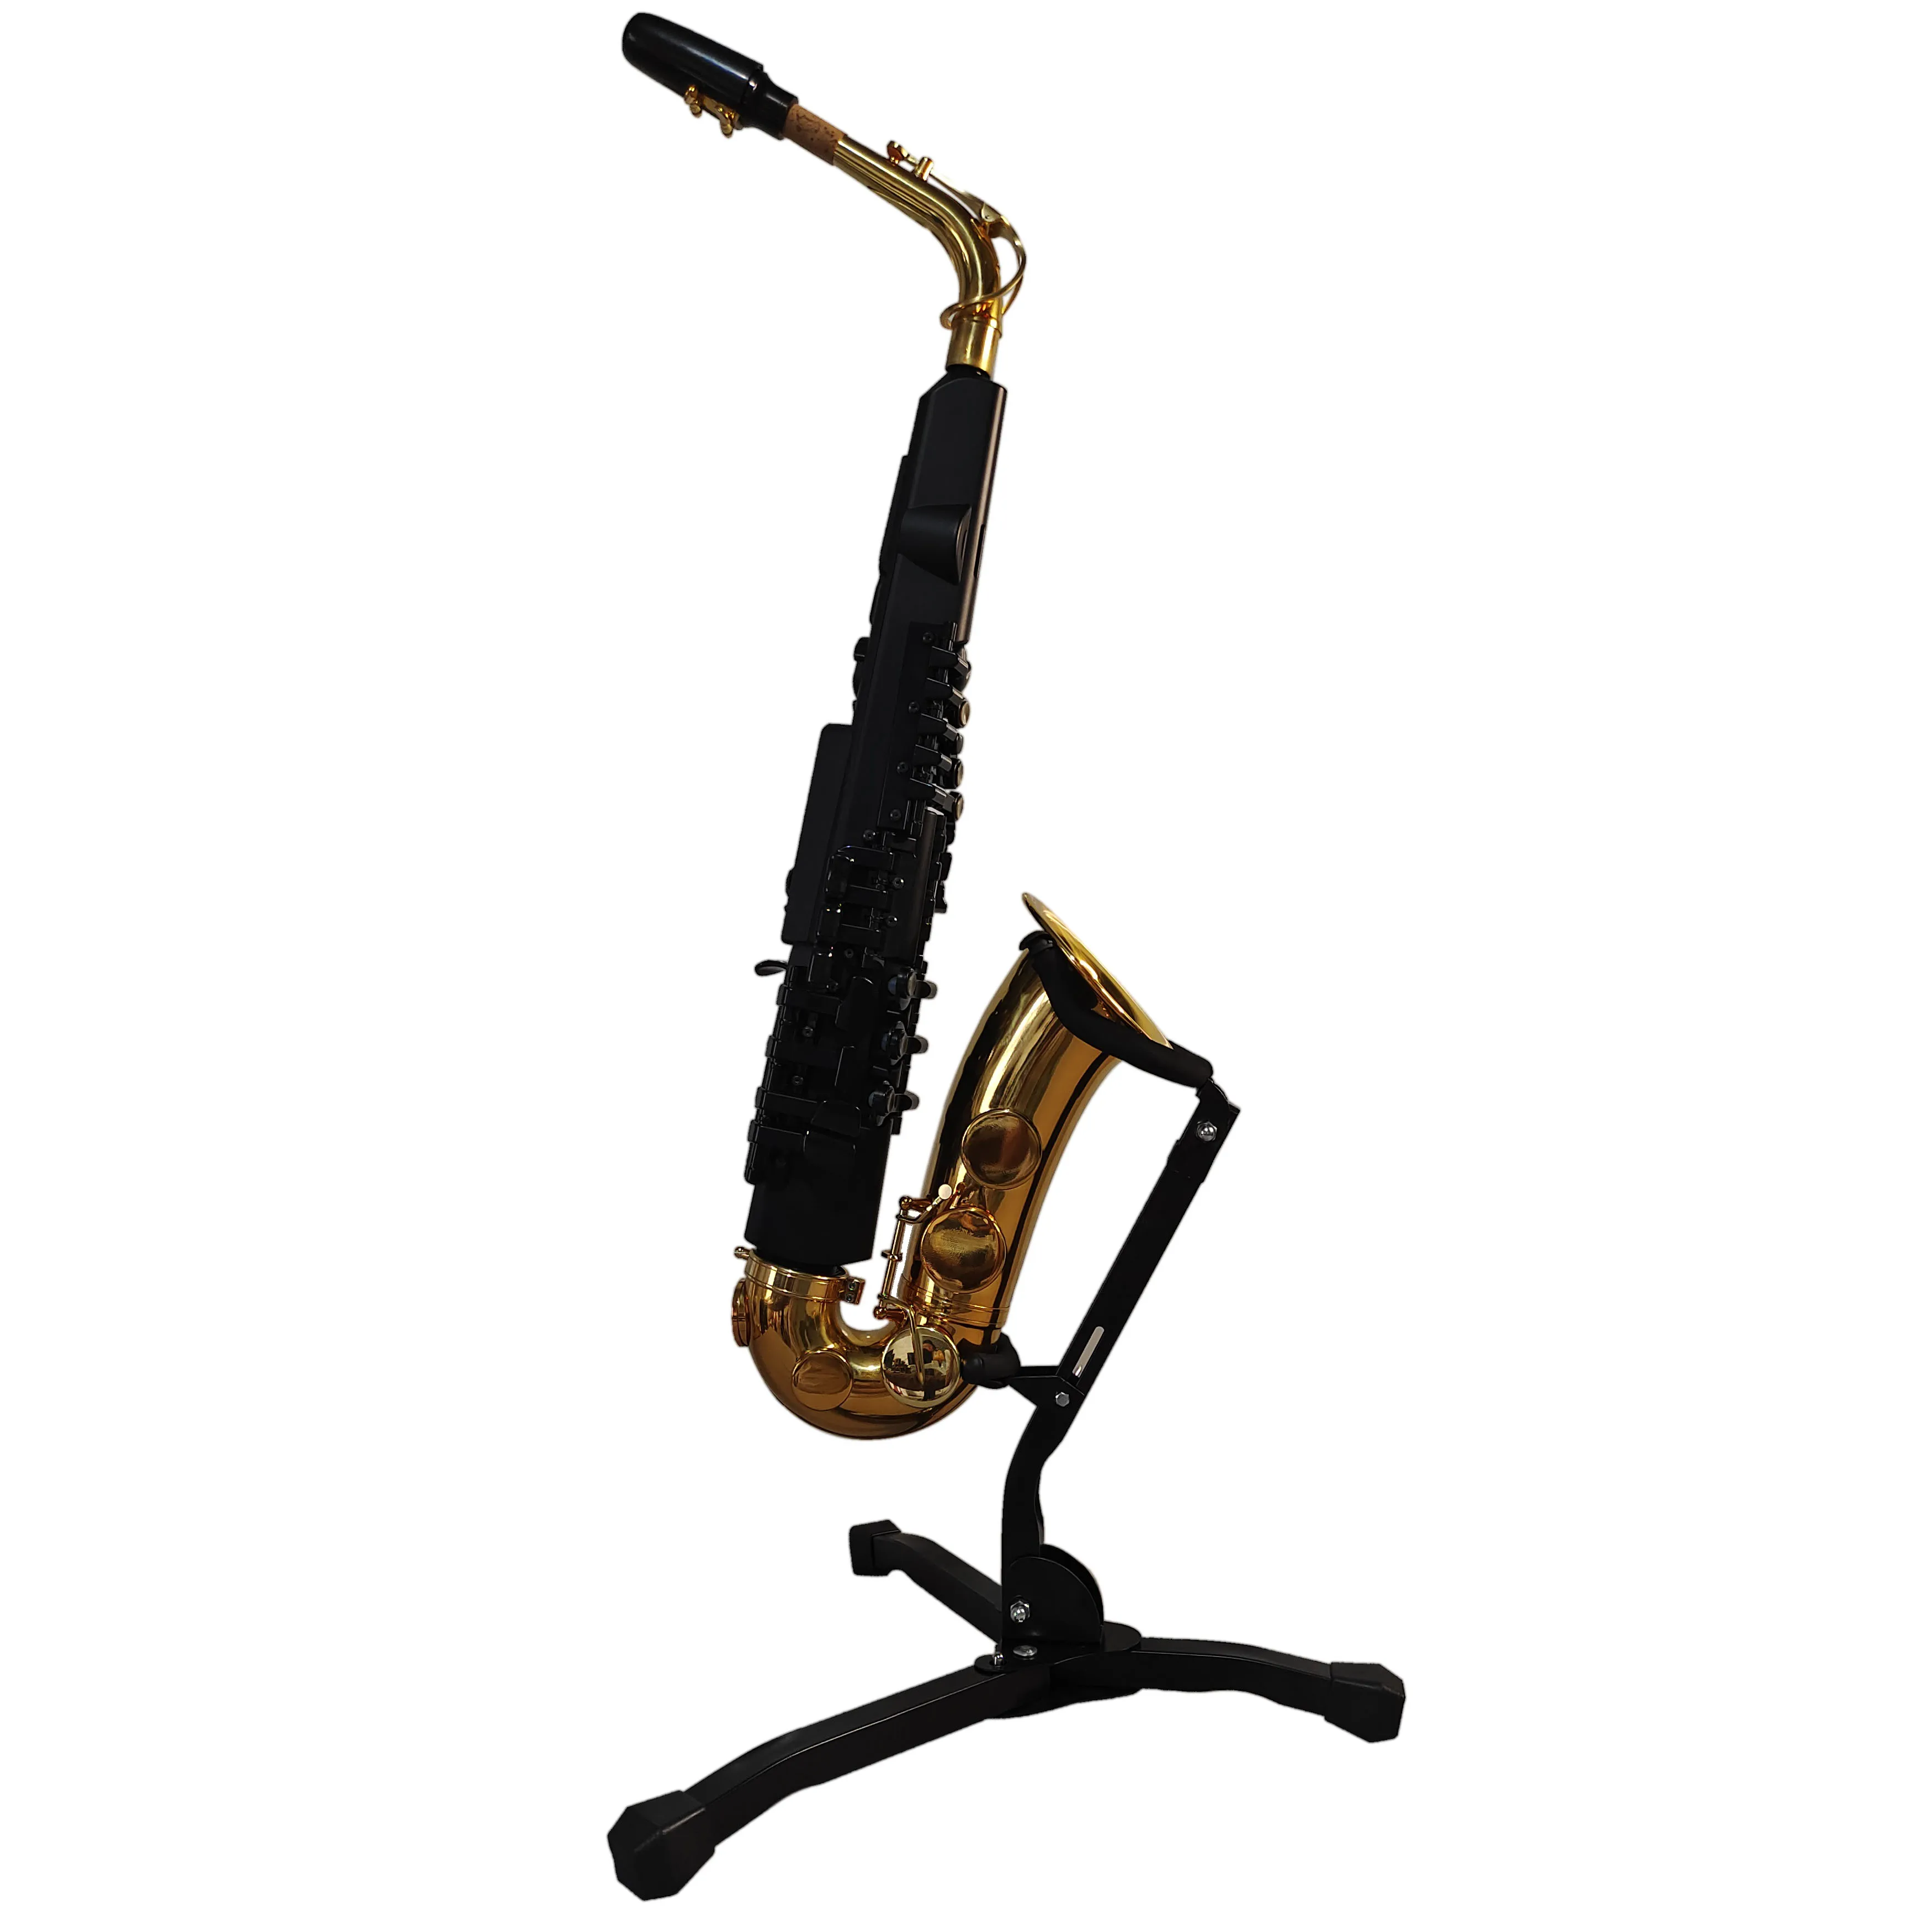 

Refer to Modified Elbow Yamaha Yds150 Kit ATLO Saxophone Curved Neck Pure Copper Curved Neck Curved Speaker